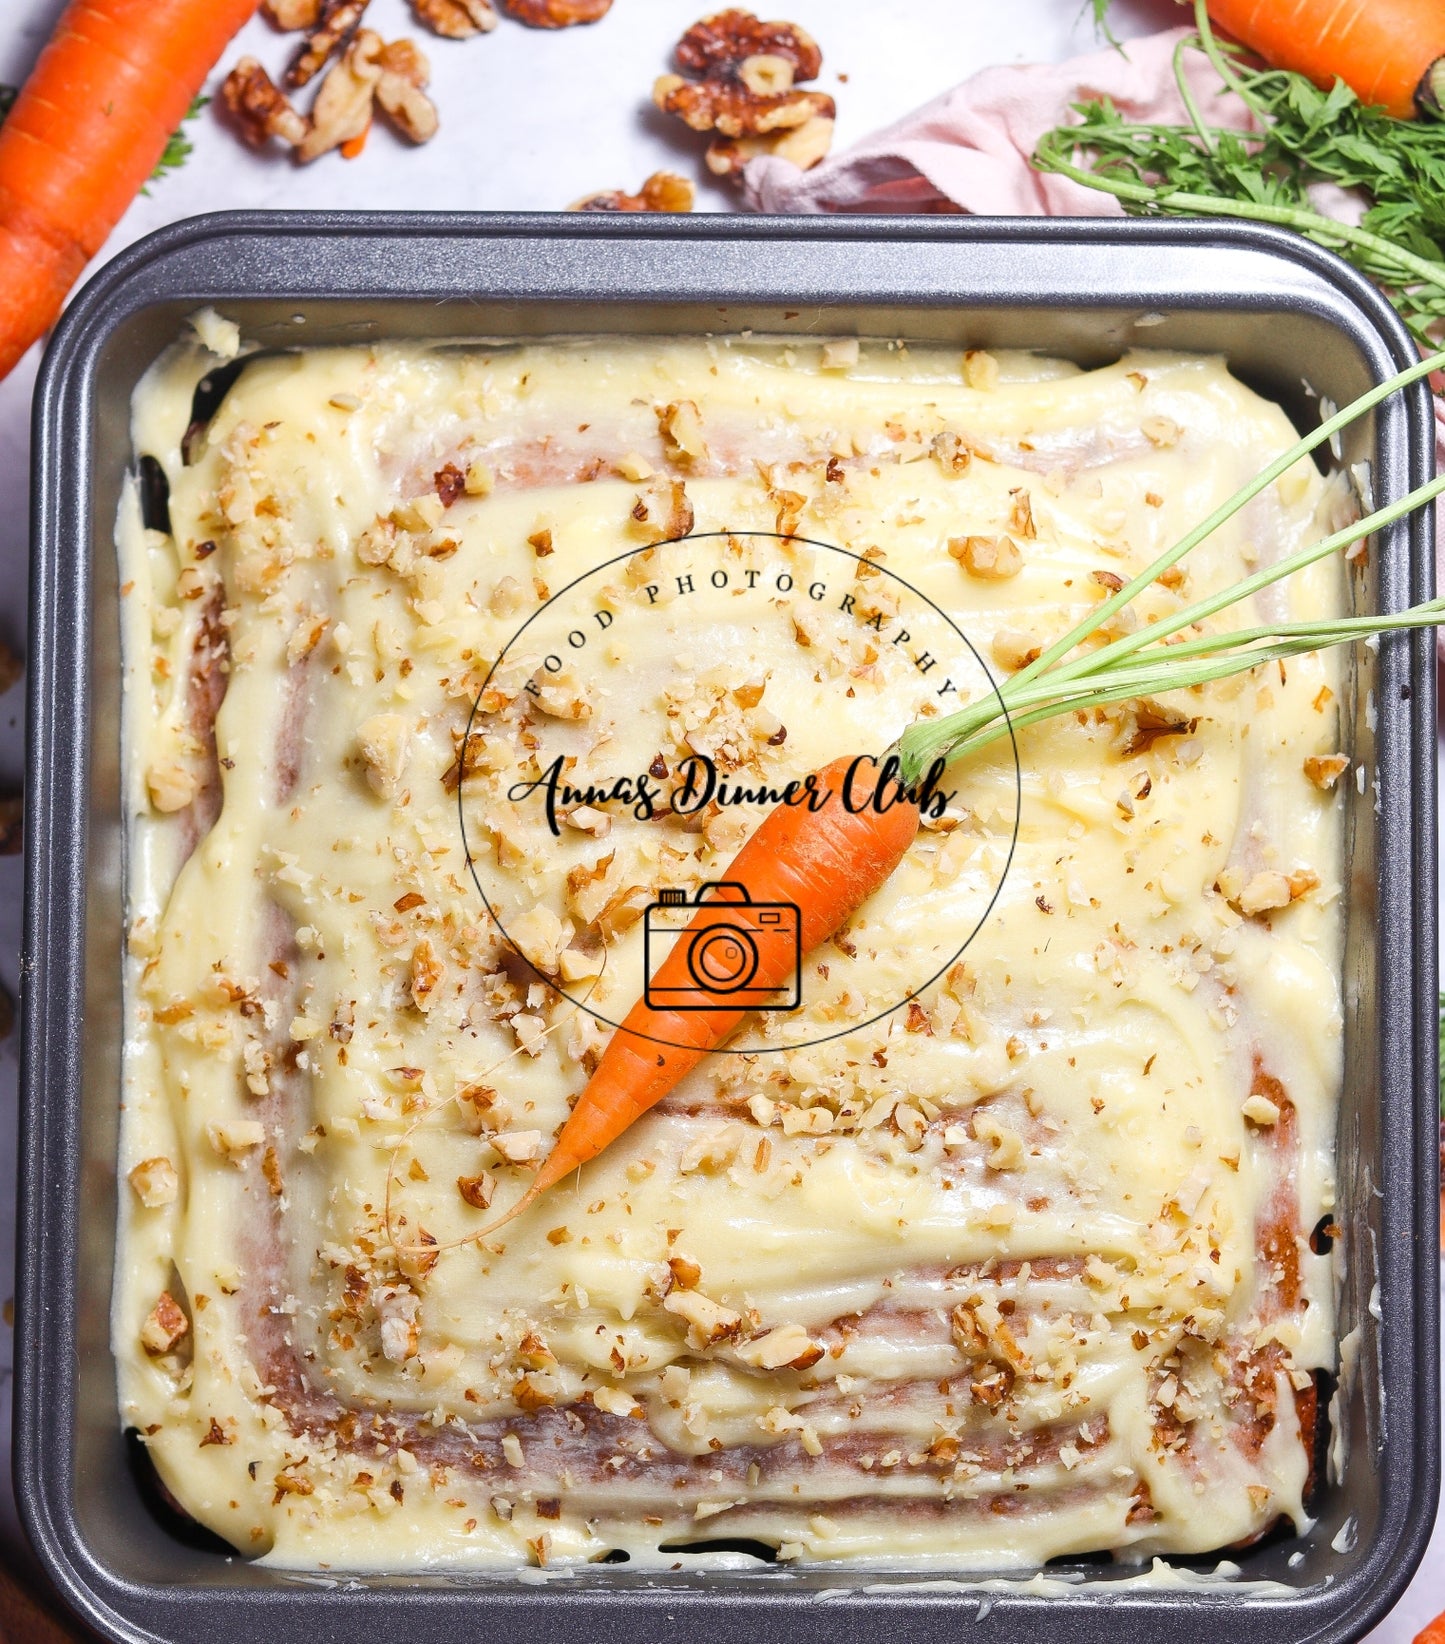 Quick and Easy Carrot Cake  PLR set